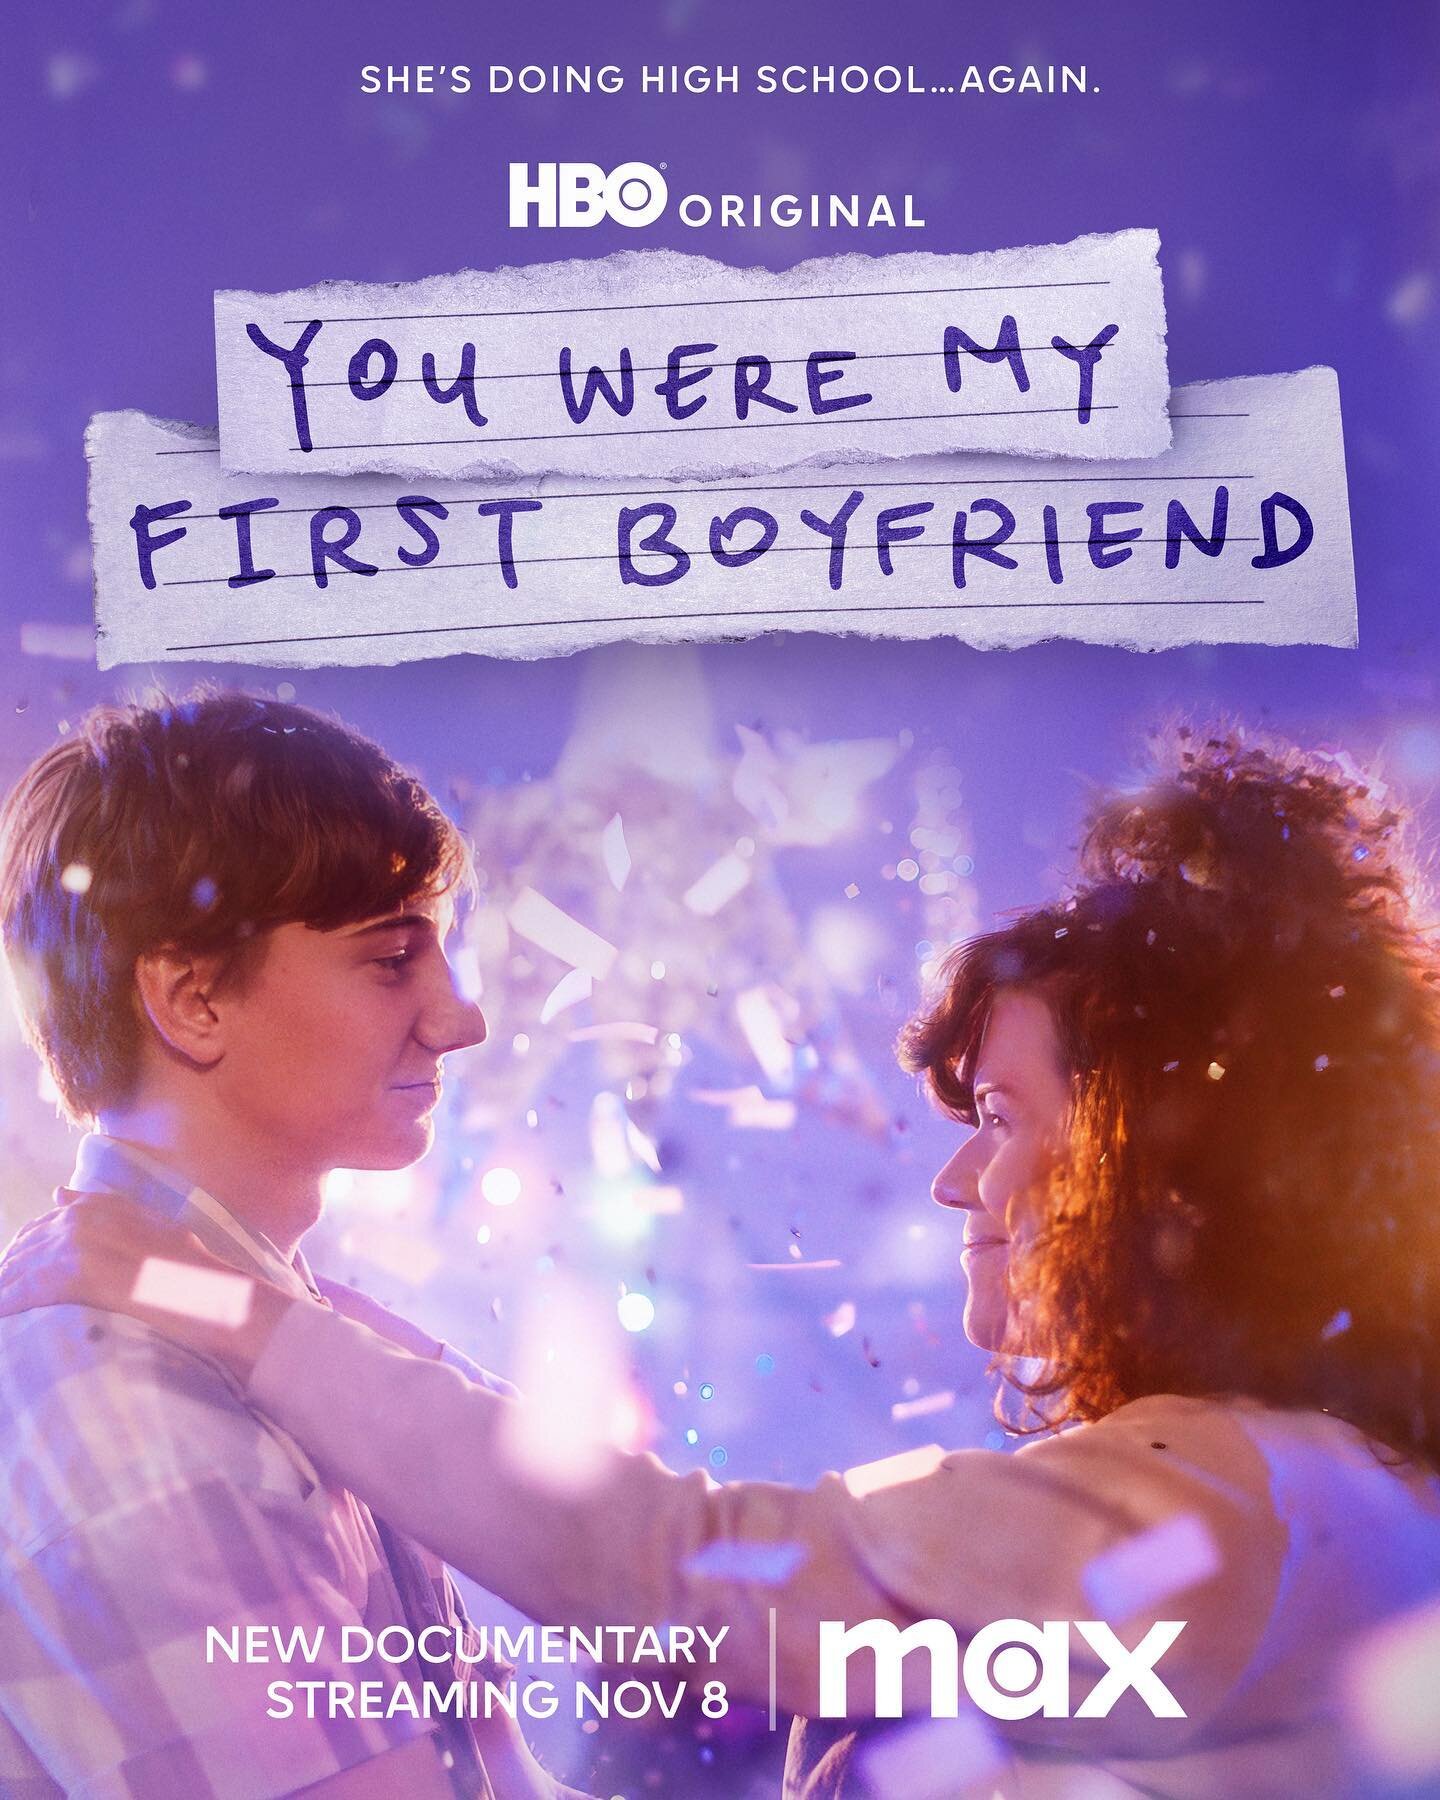 YOU WERE MY FIRST BOYFRIEND coming to NYC theaters Nov. 3-9 and streaming on @hbo starting Nov. 8!

Entertaining, moving, nostalgic, therapy on screen, a documentary and therapeutic process done in a completely original way.
(this is my own review 😜